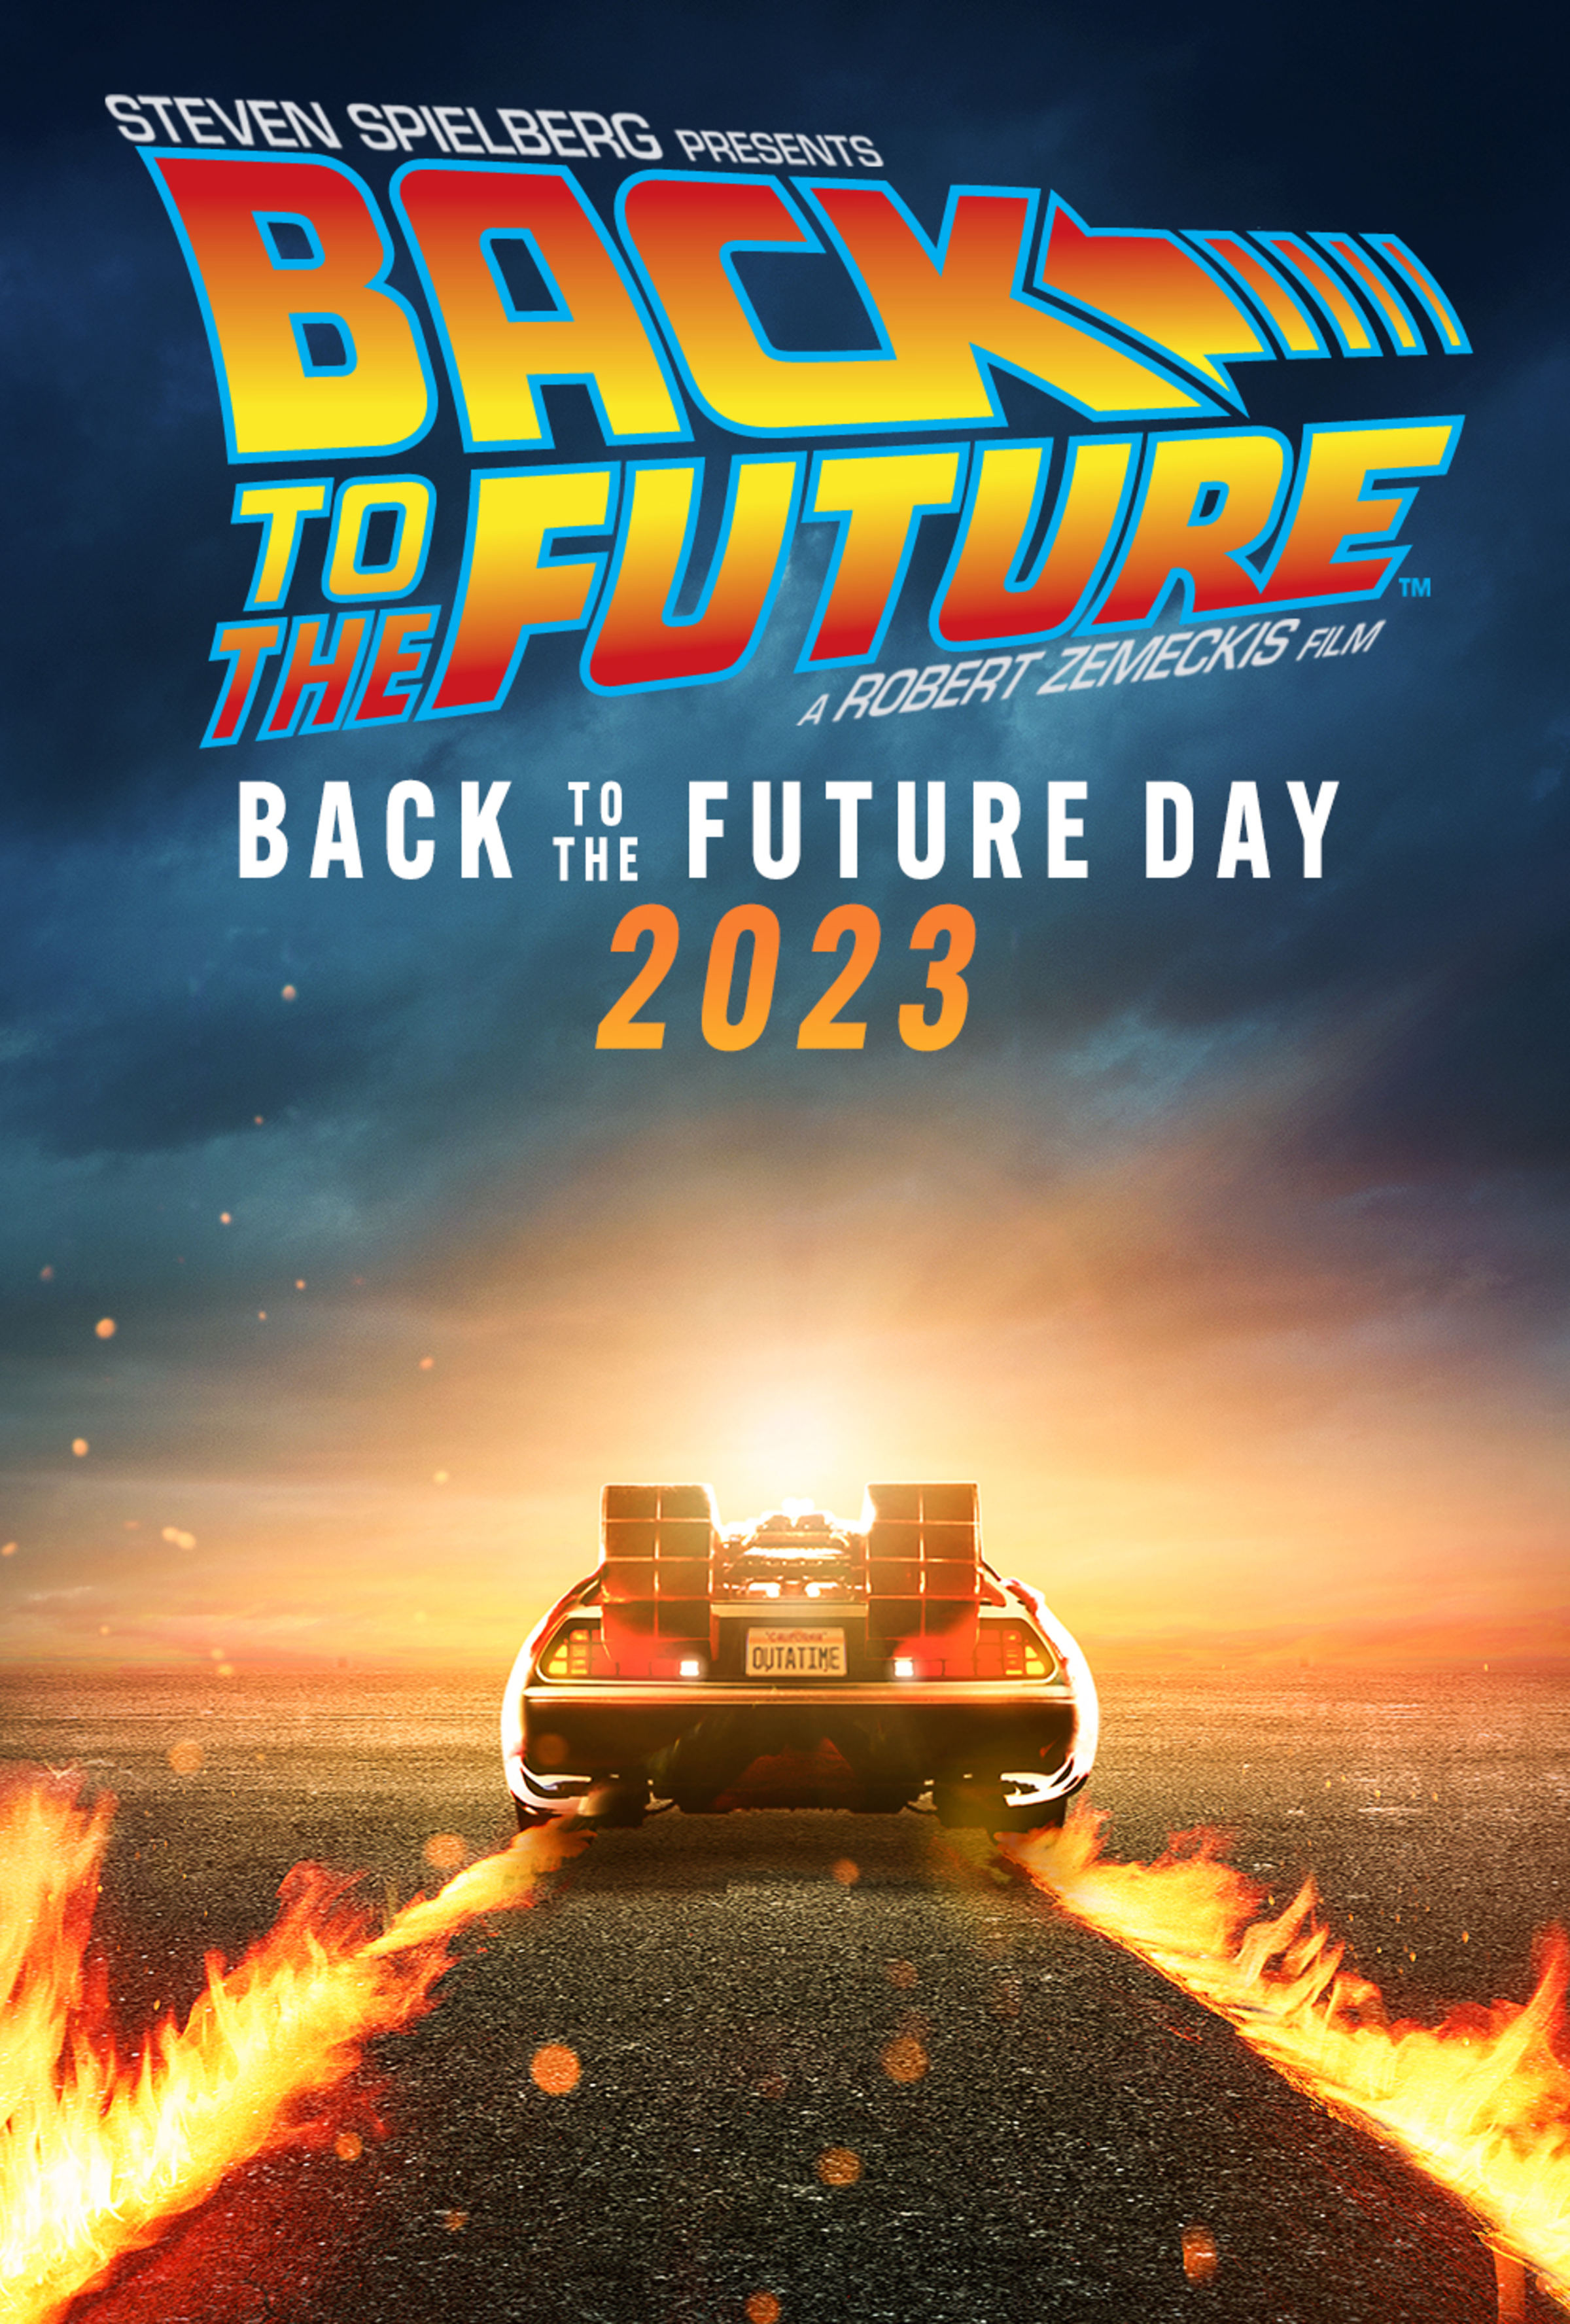 Back to the Future Day - Fathom Events